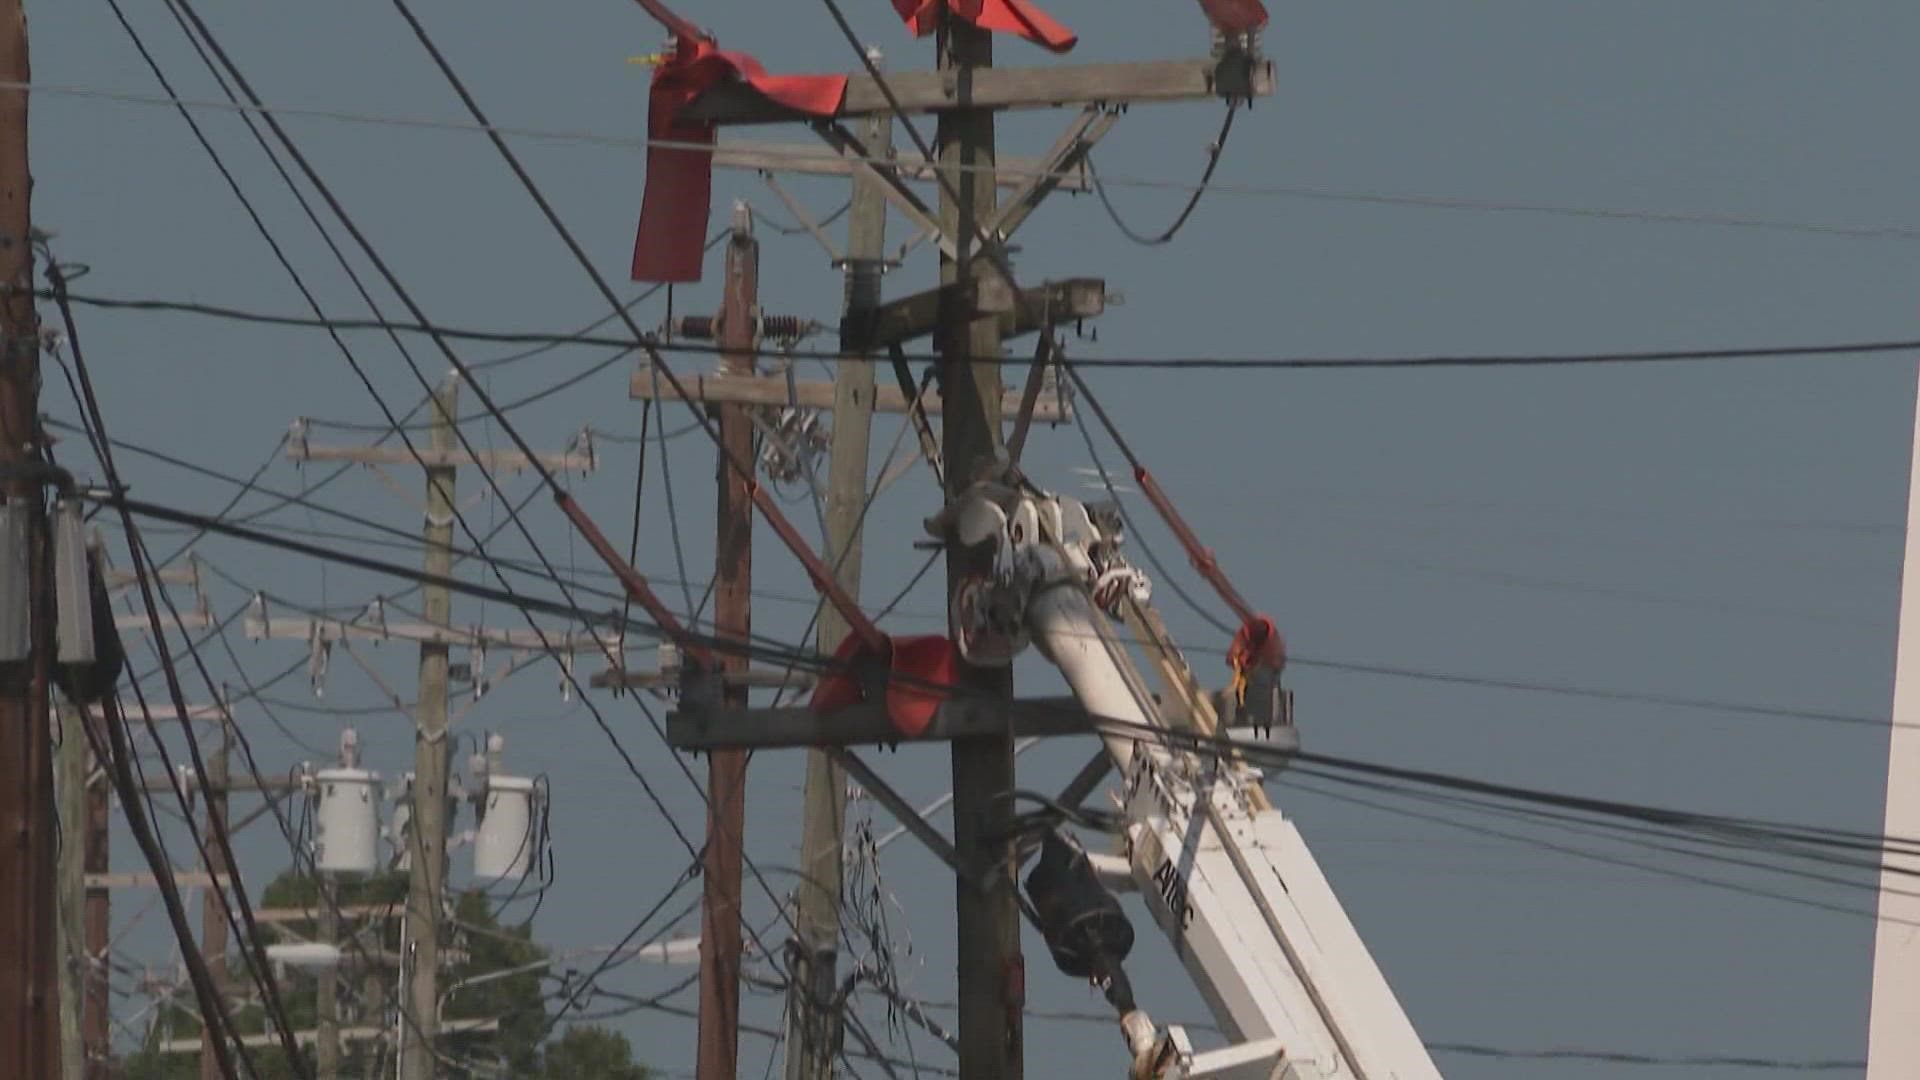 A car crash caused the outage. Crews worked all Friday afternoon to restore the power.